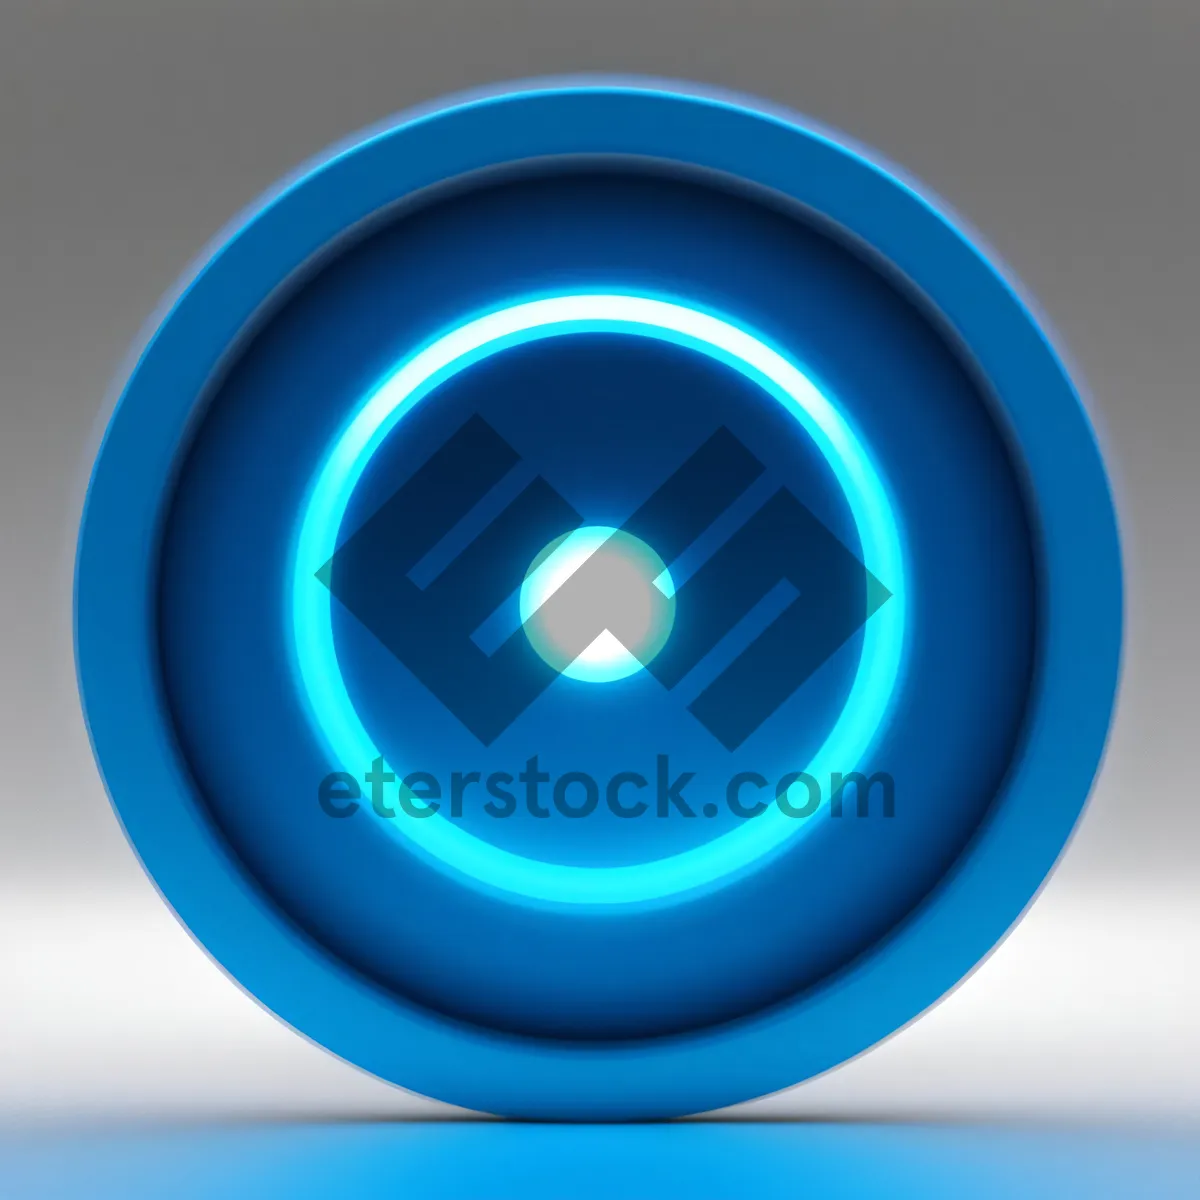 Picture of Shiny Button Set with Glass Reflection